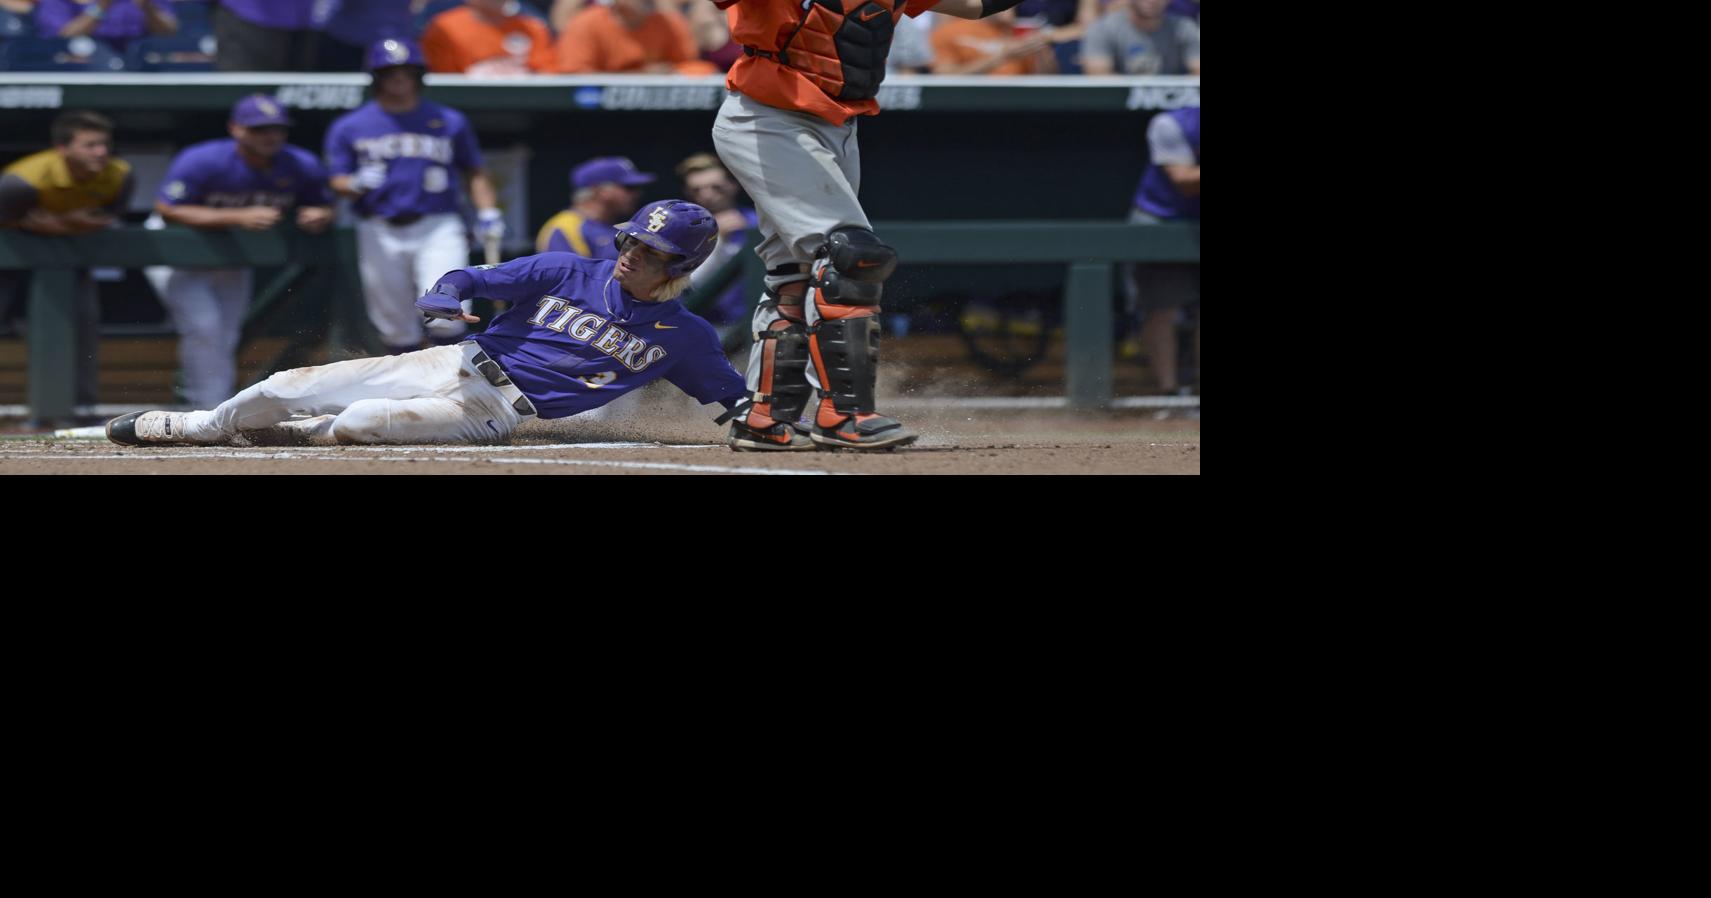 With Oregon State in LSU baseball’s regional, a budding rivalry could be renewed